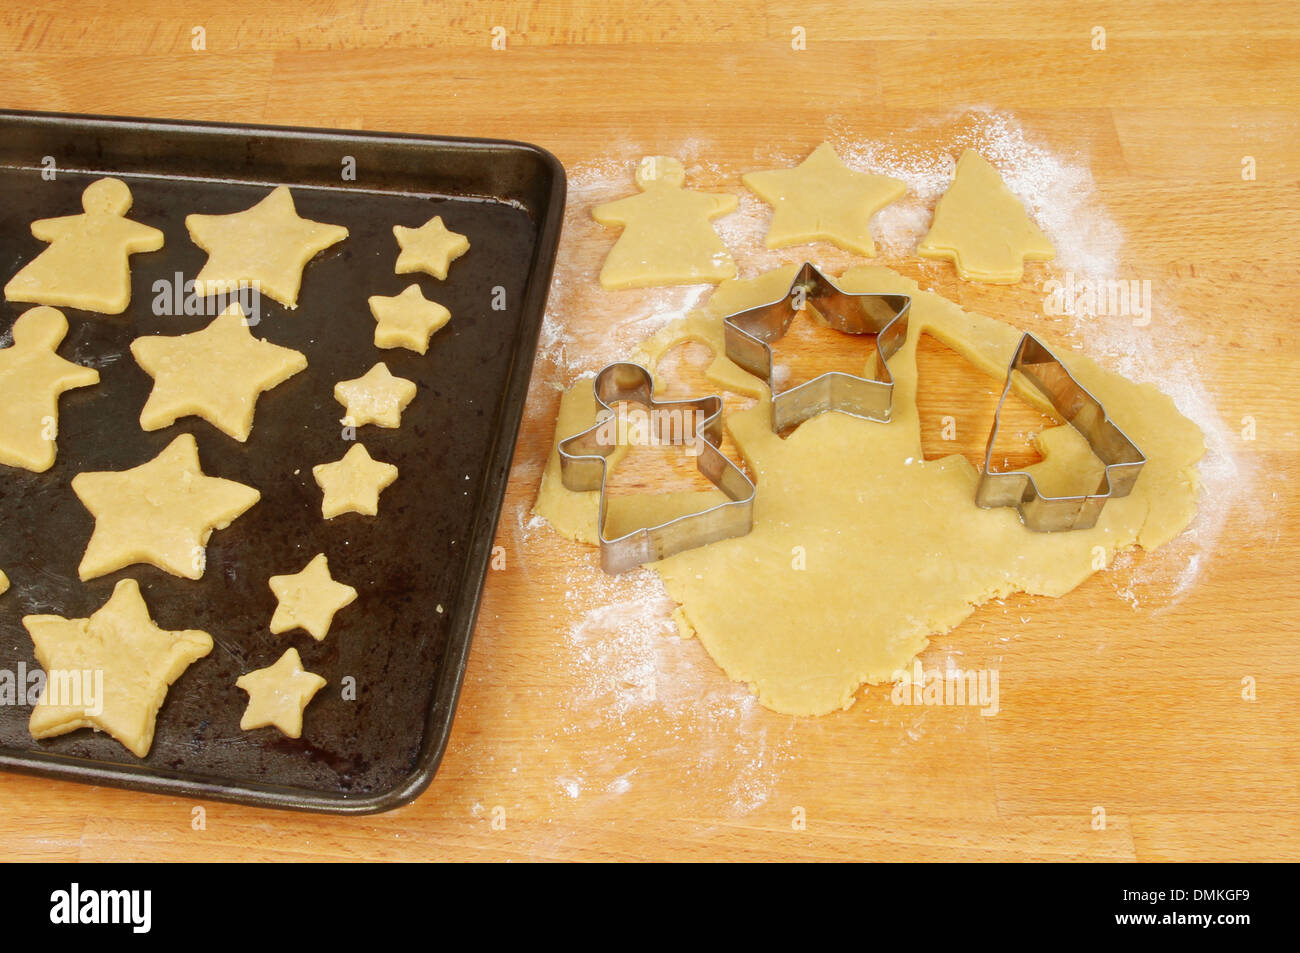 Cookie cutters and shortbread shapes on a board and a baking tray Stock Photo